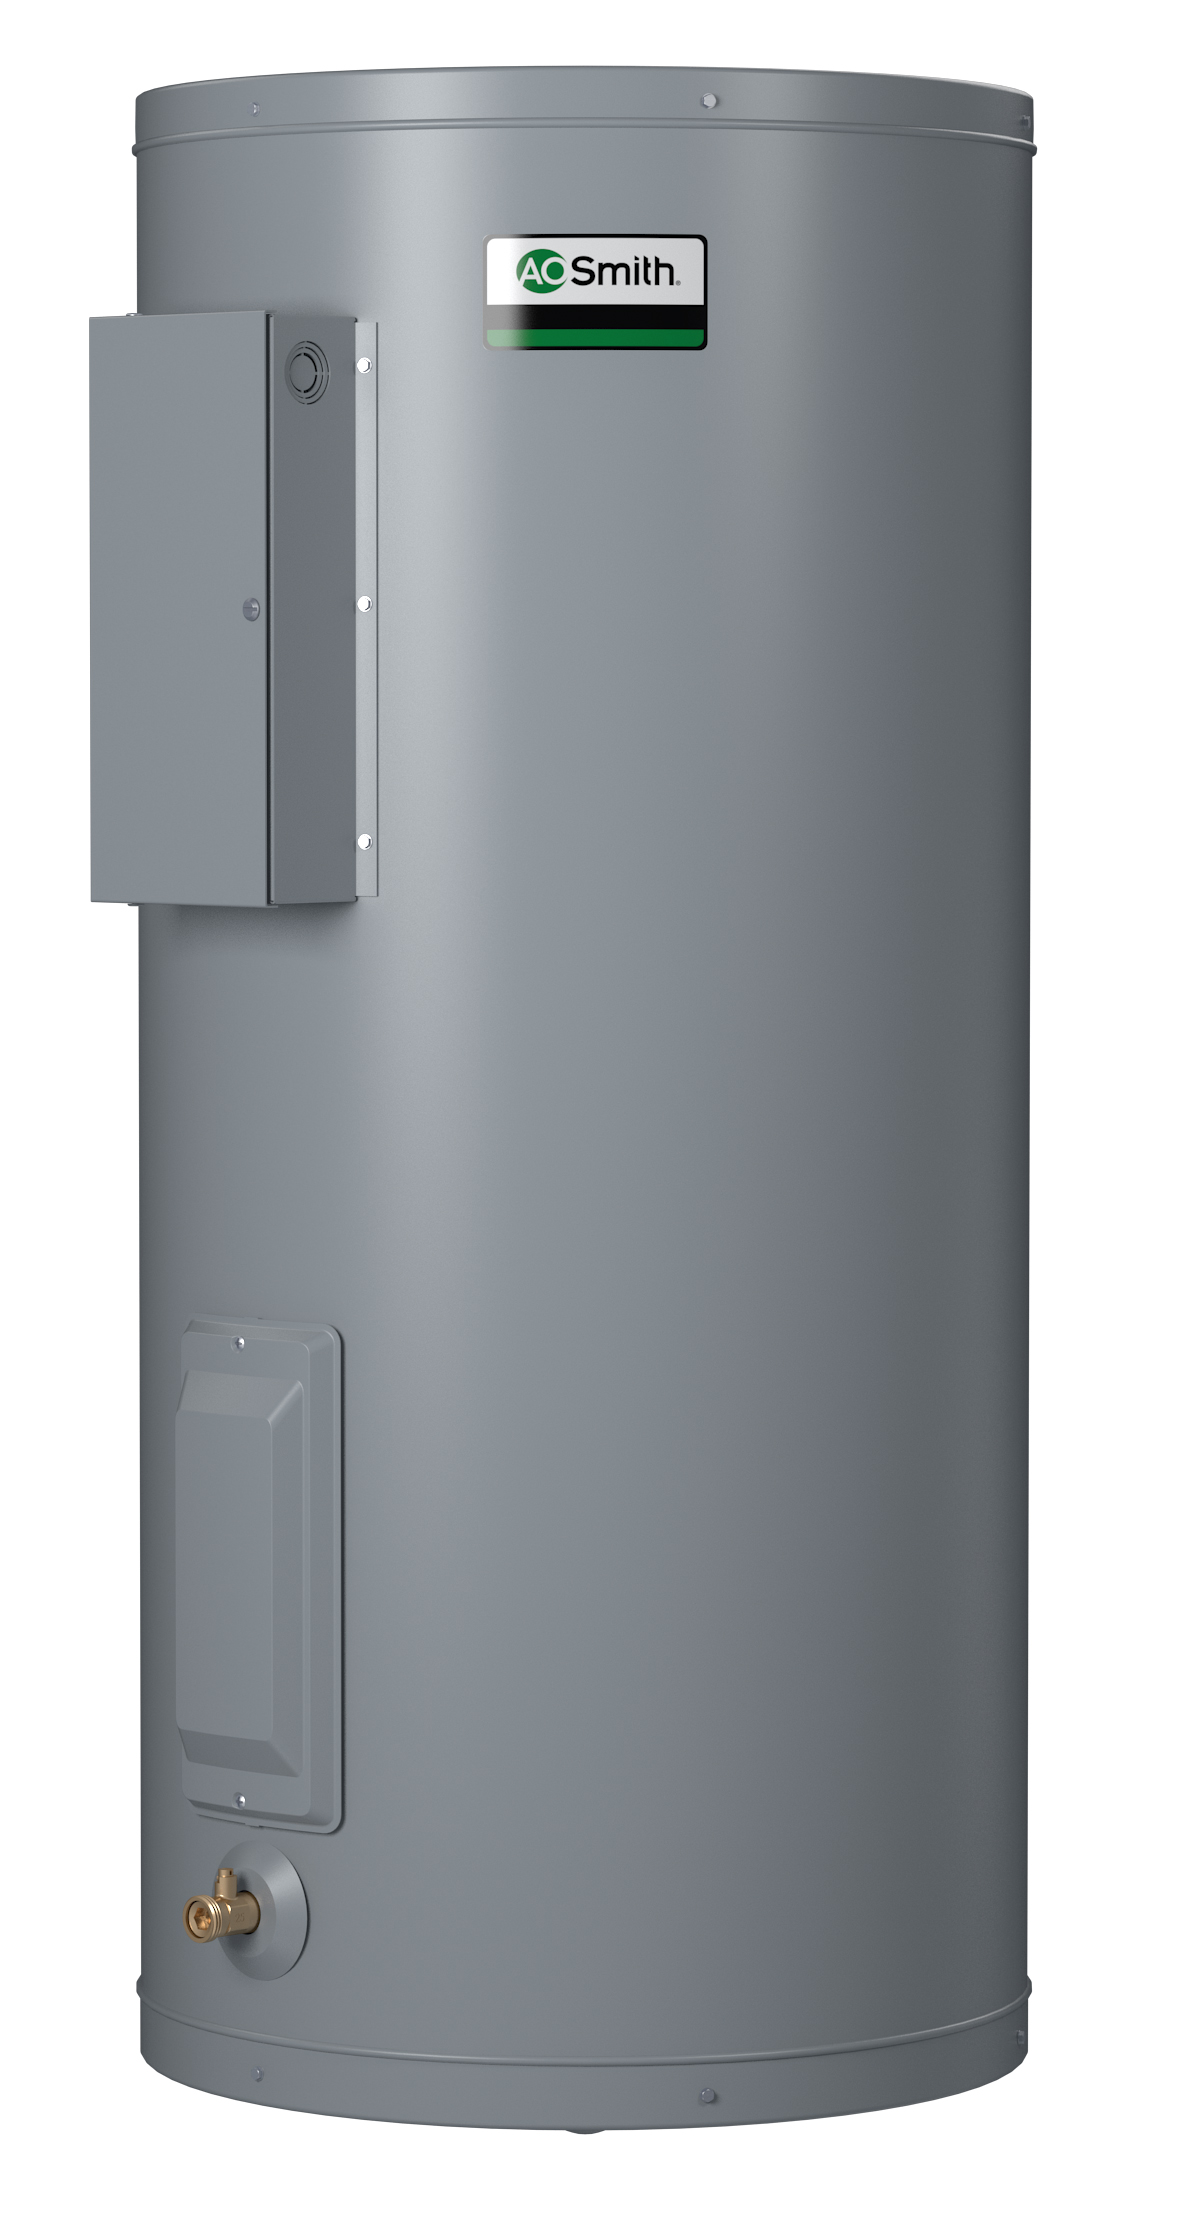 AO SMITH DEL-10S: 10 GALLONS, 4.5KW, 240 VOLT, 18.75 AMPS, 1 PHASE, SINGLE ELEMENT, LIGHT DUTY COMMERCIAL ELECTRIC WATER HEATER, DURA-POWER